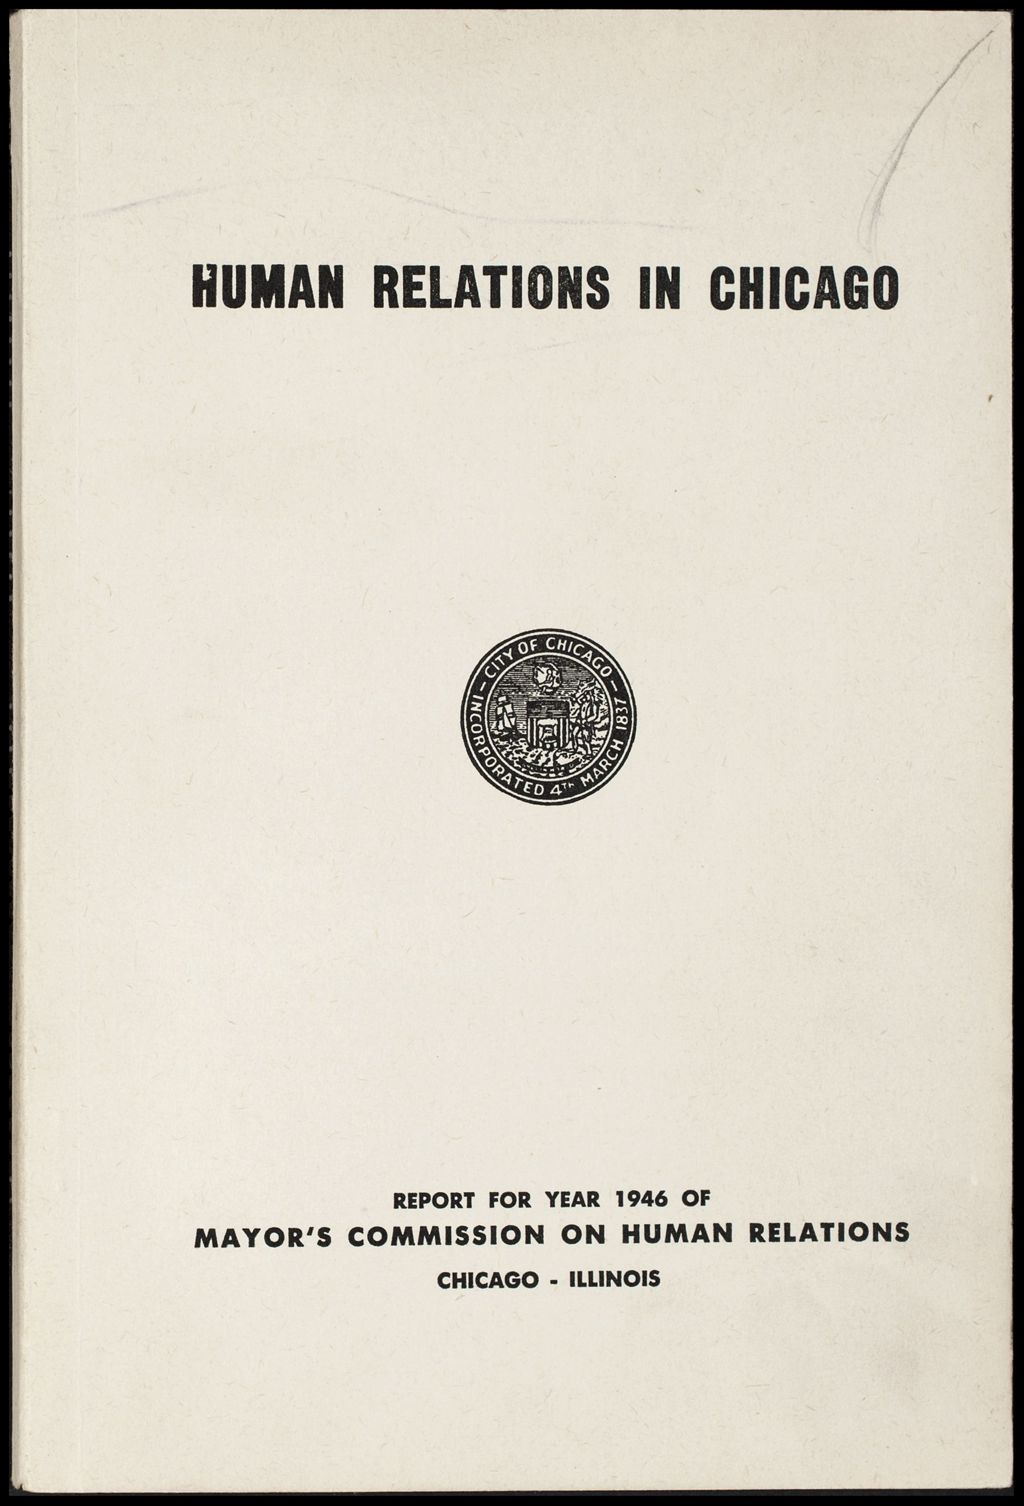 Miniature of Mayor's Commission on Human Relations annual reports, 1946 (Folder I-2647)